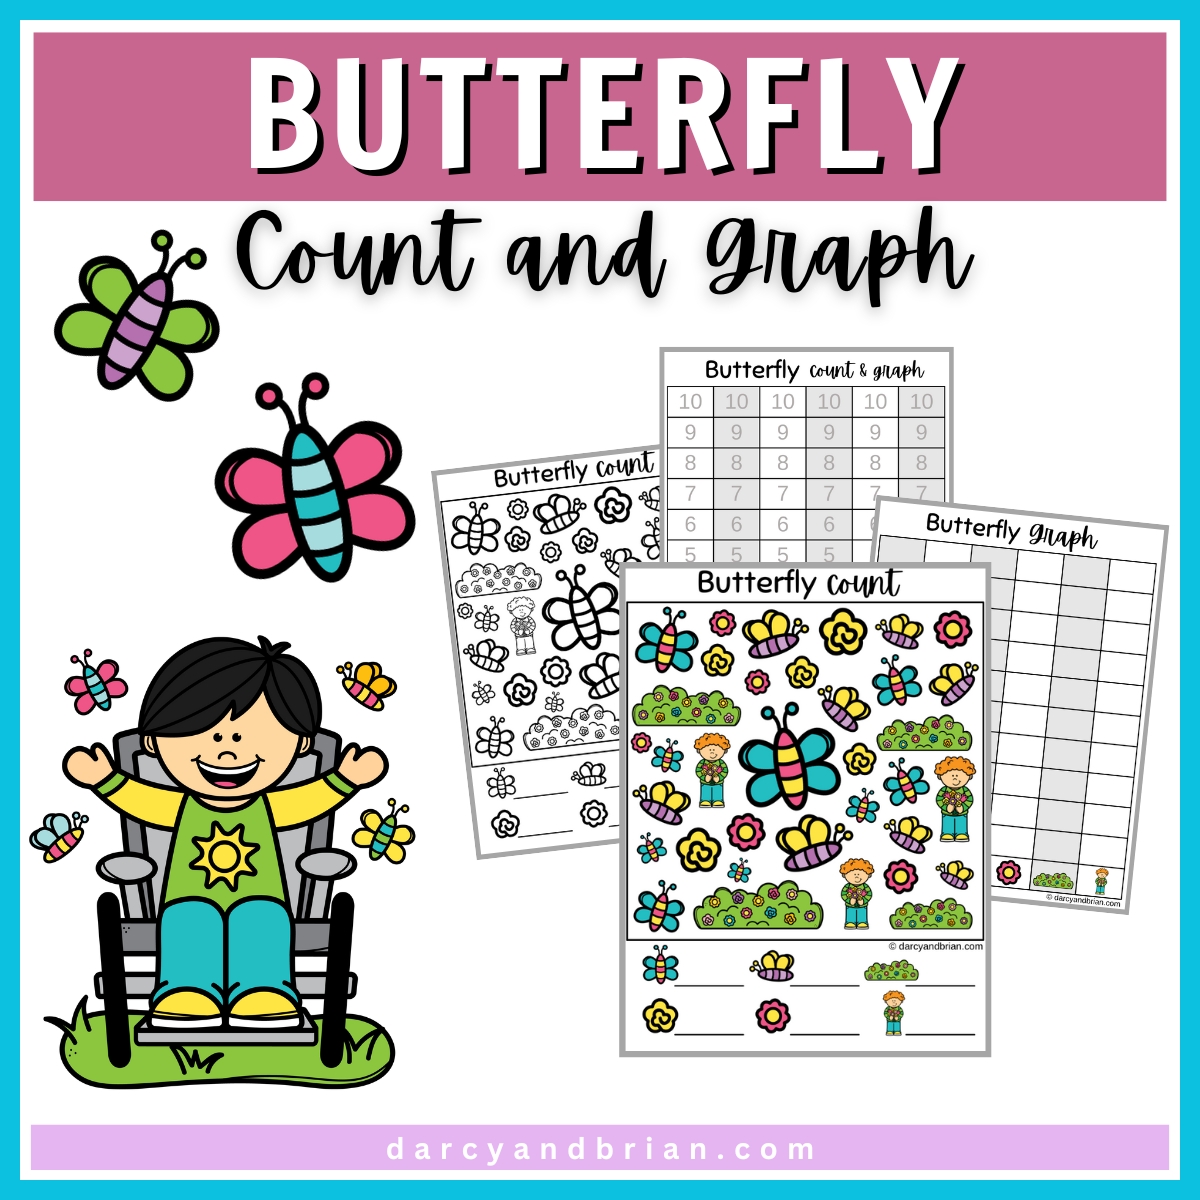 Butterfly Count and Graph